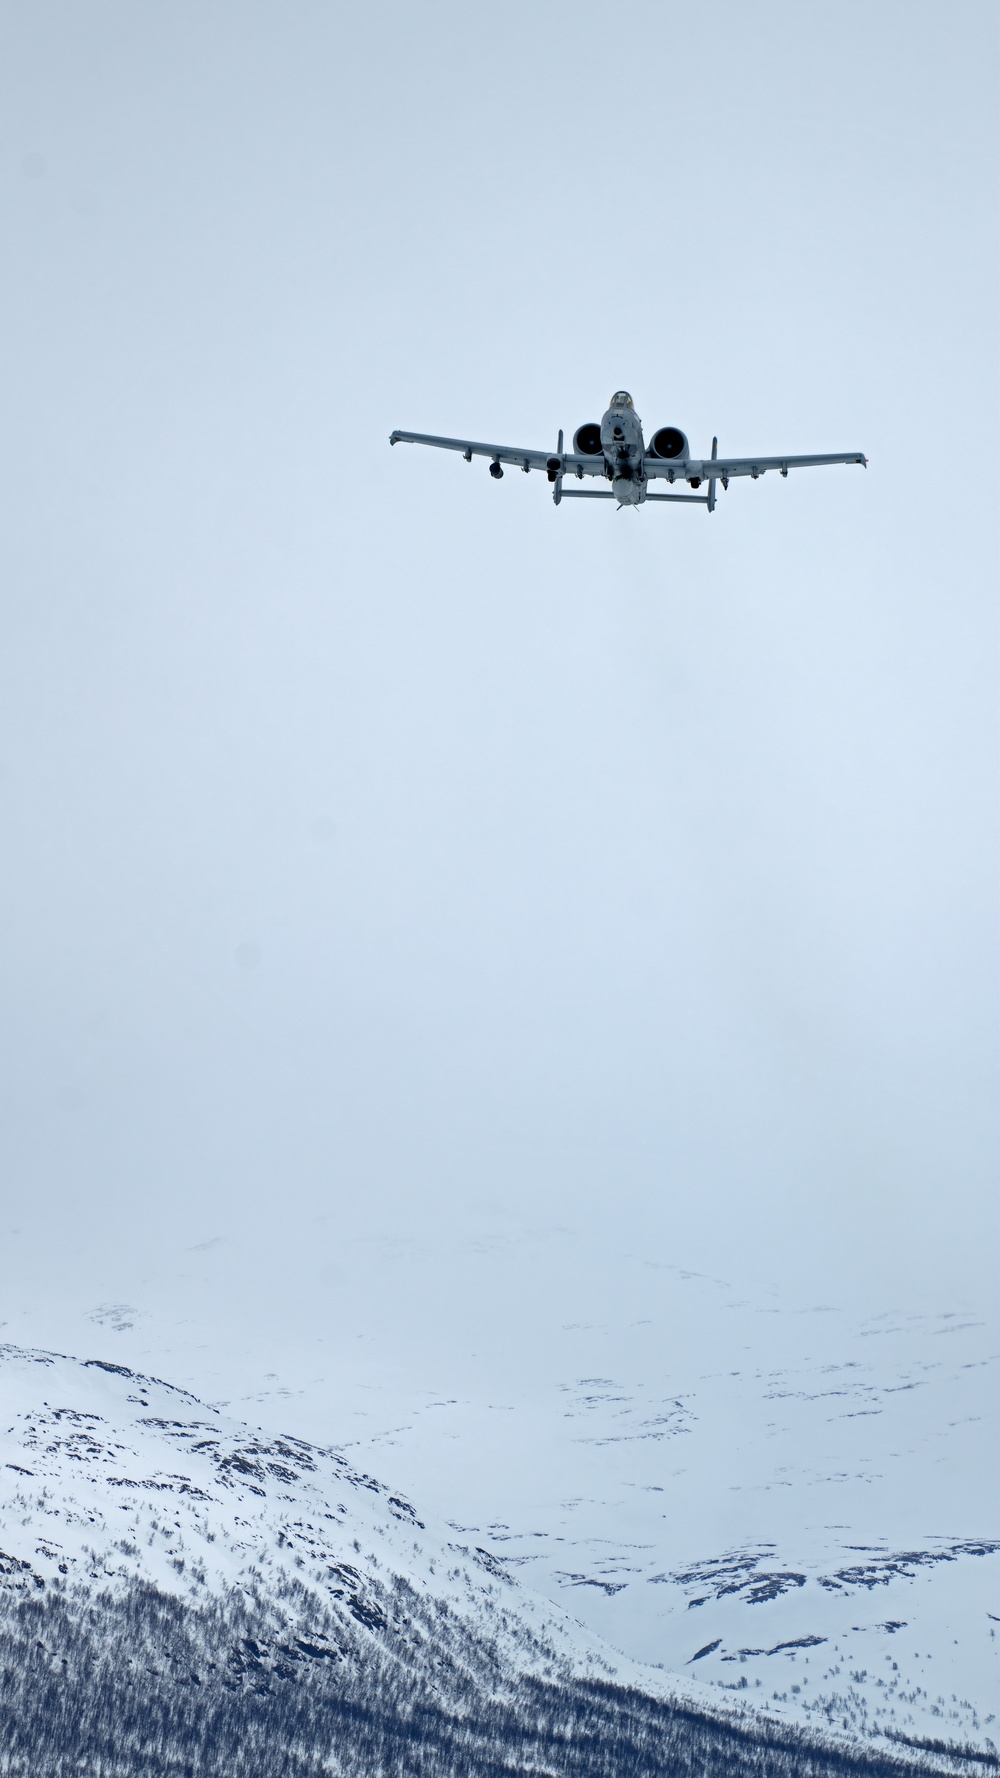 Maryland A-10s in Norway